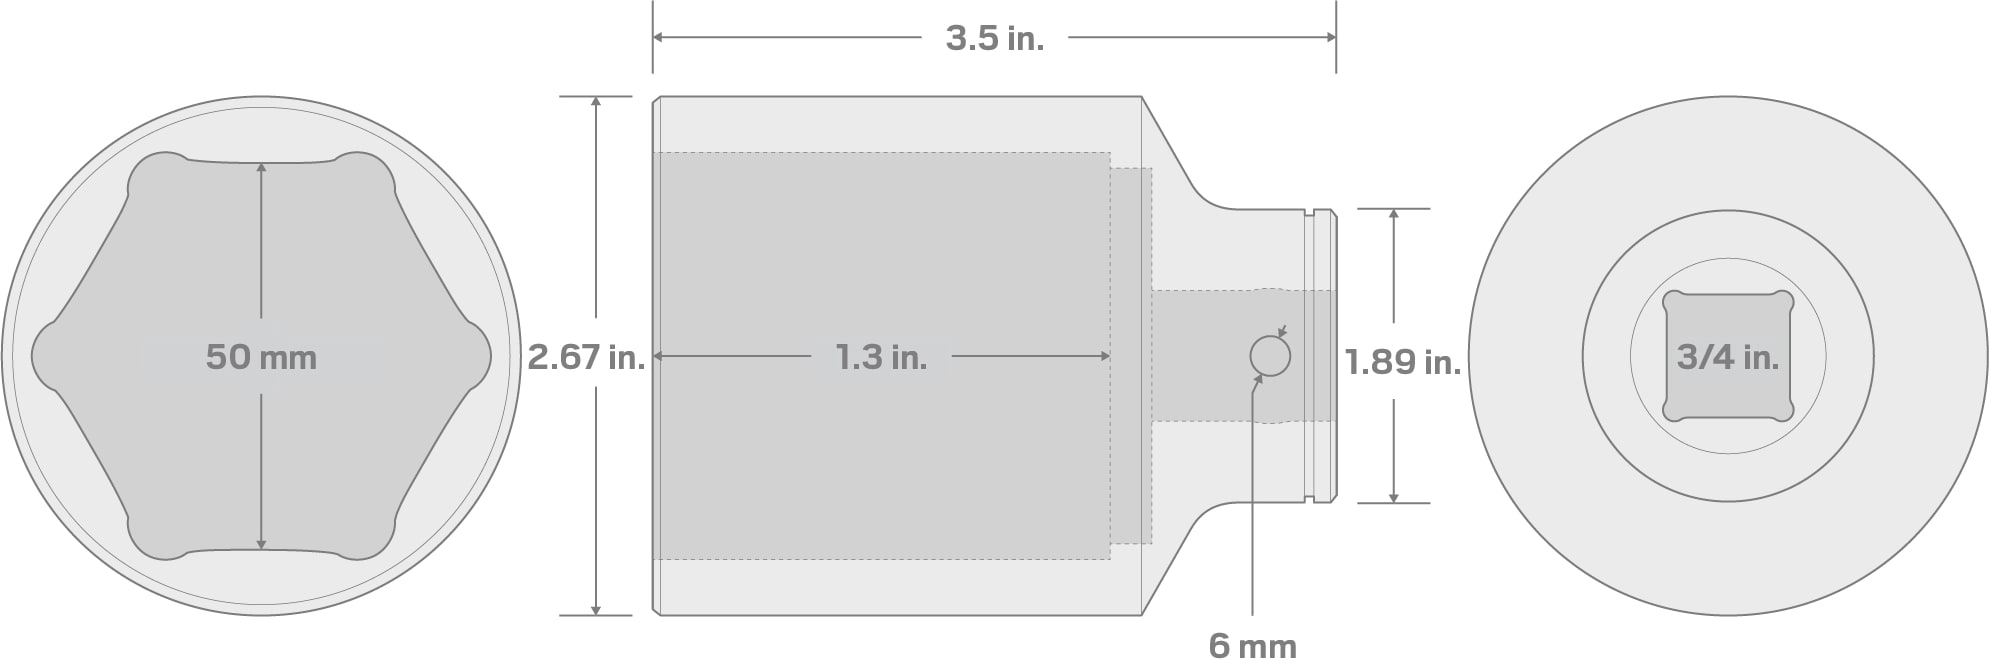 Specs for 3/4 Inch Drive x 50 mm Deep 6-Point Socket